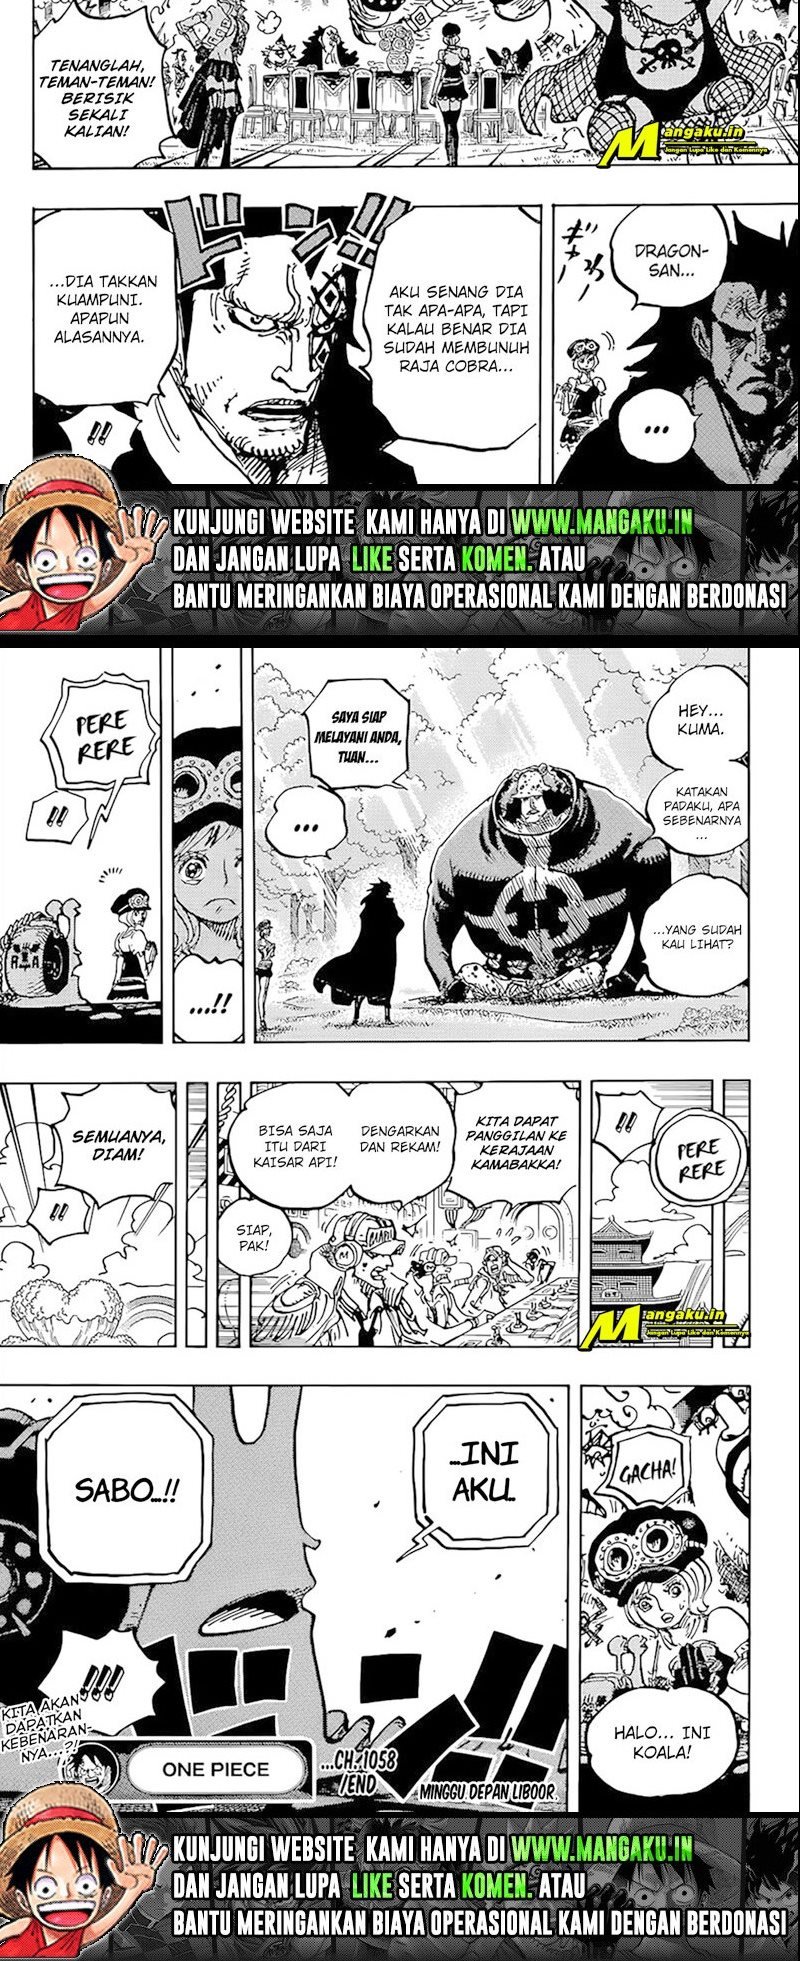 One Piece Chapter 1058 Hq - 71